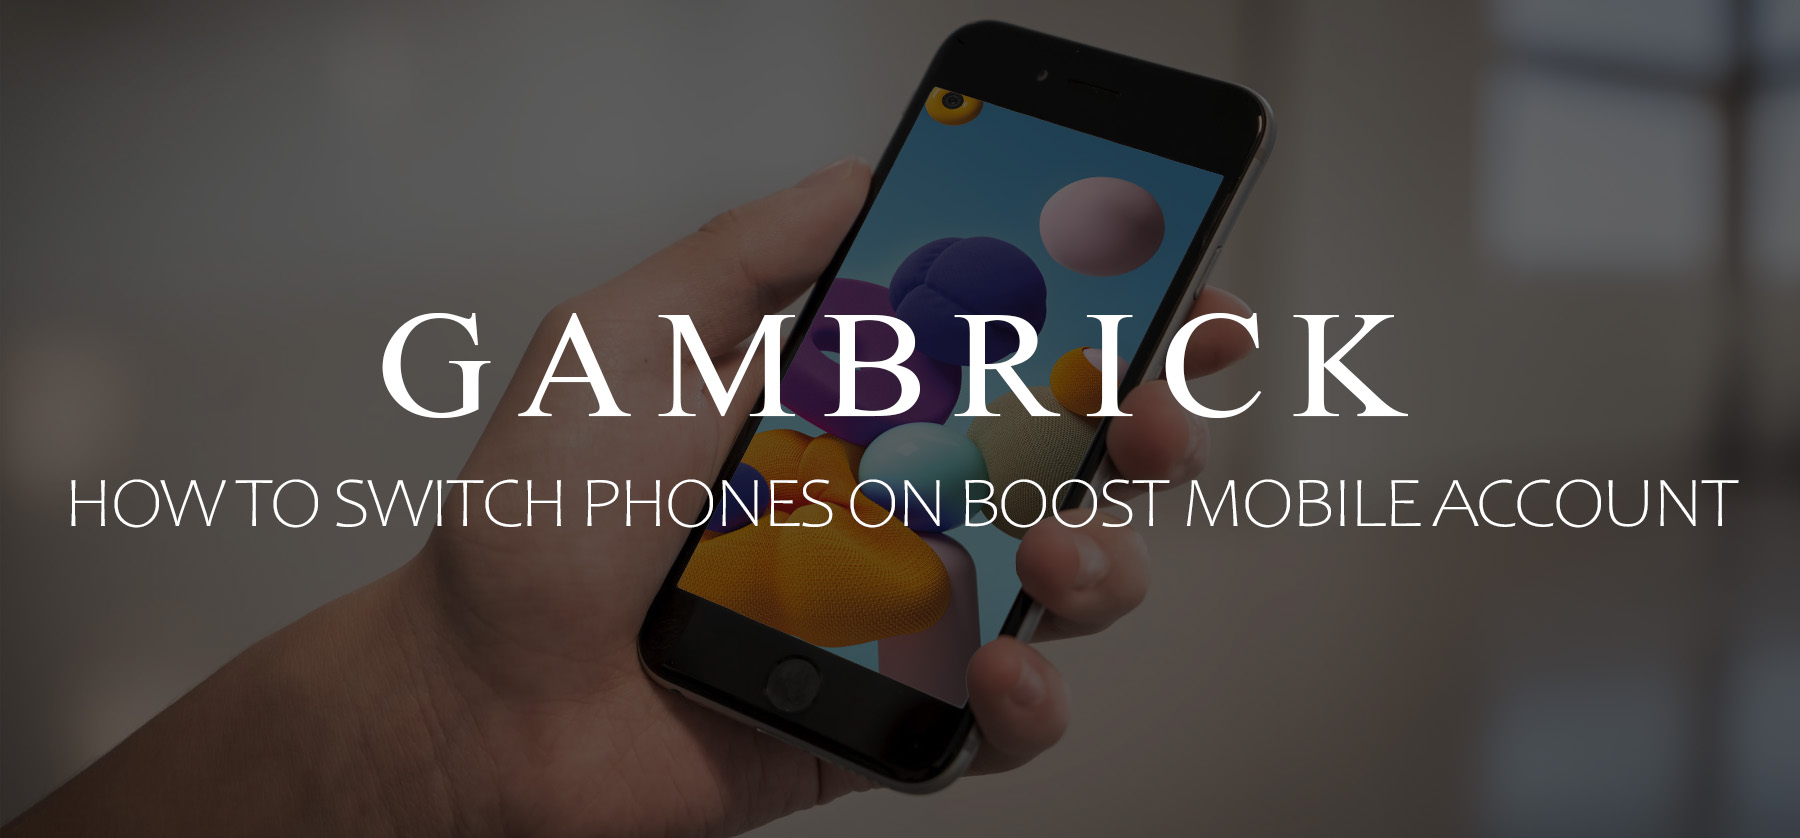 how to switch phones on Boost Mobile account banner 1.0